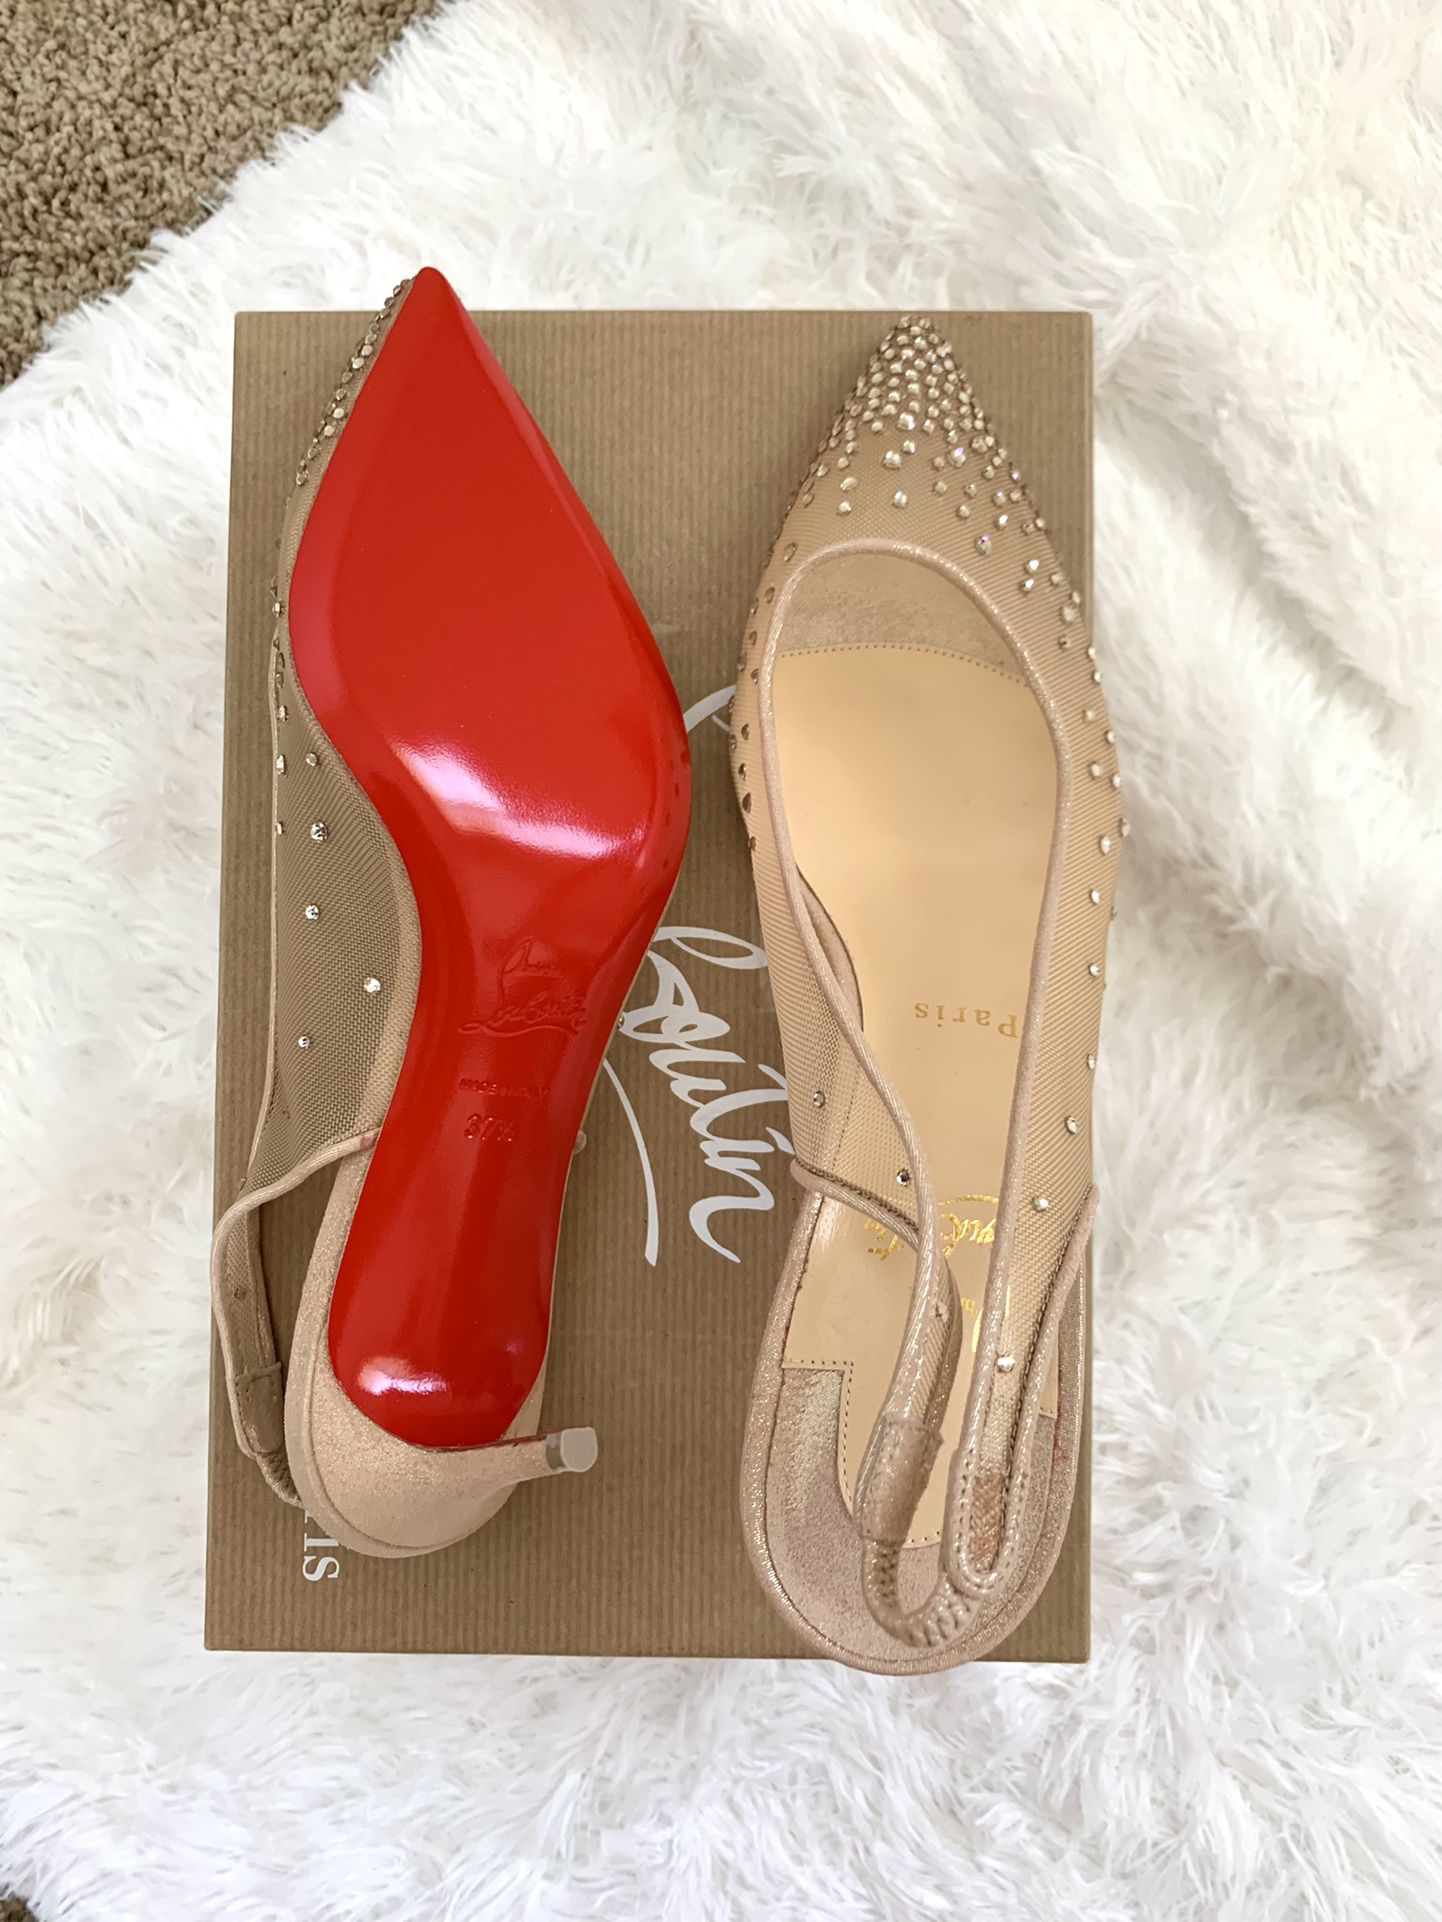 CHRISTIAN LOUBOUTIN - SILKY SATIN LIP COLOUR VERY PRIVE 410 - 0.13 OZ NEW &  BOX for Sale in Freeport, NY - OfferUp